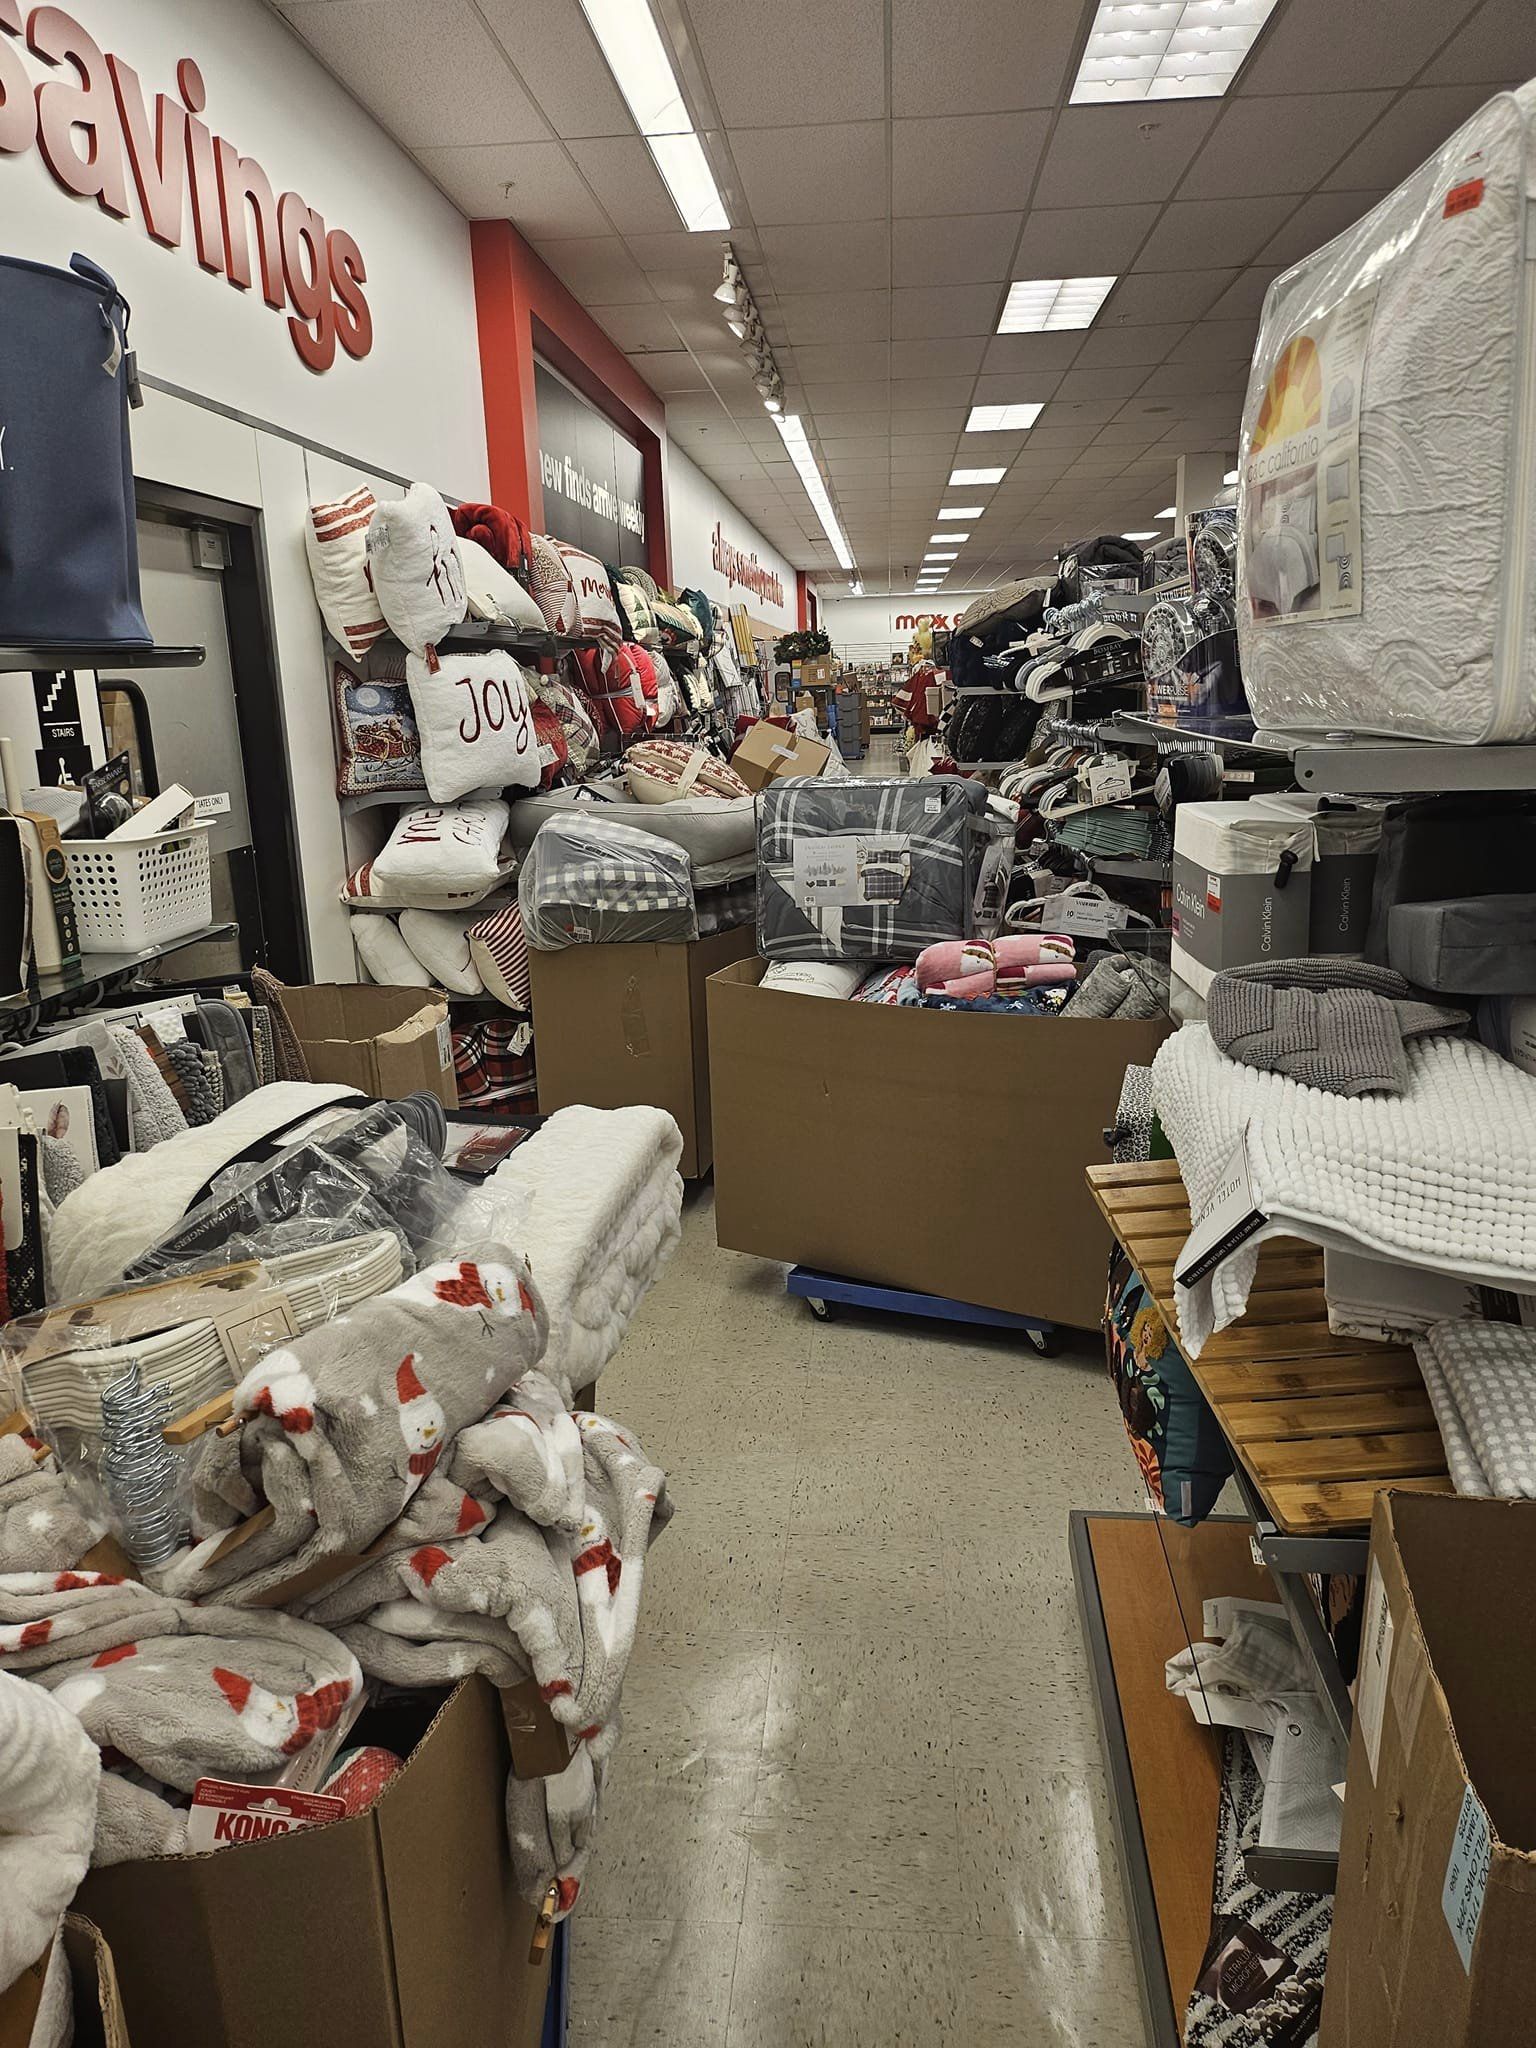 TJ Maxx reopened its online store—7 secrets for finding the best deals -  Reviewed